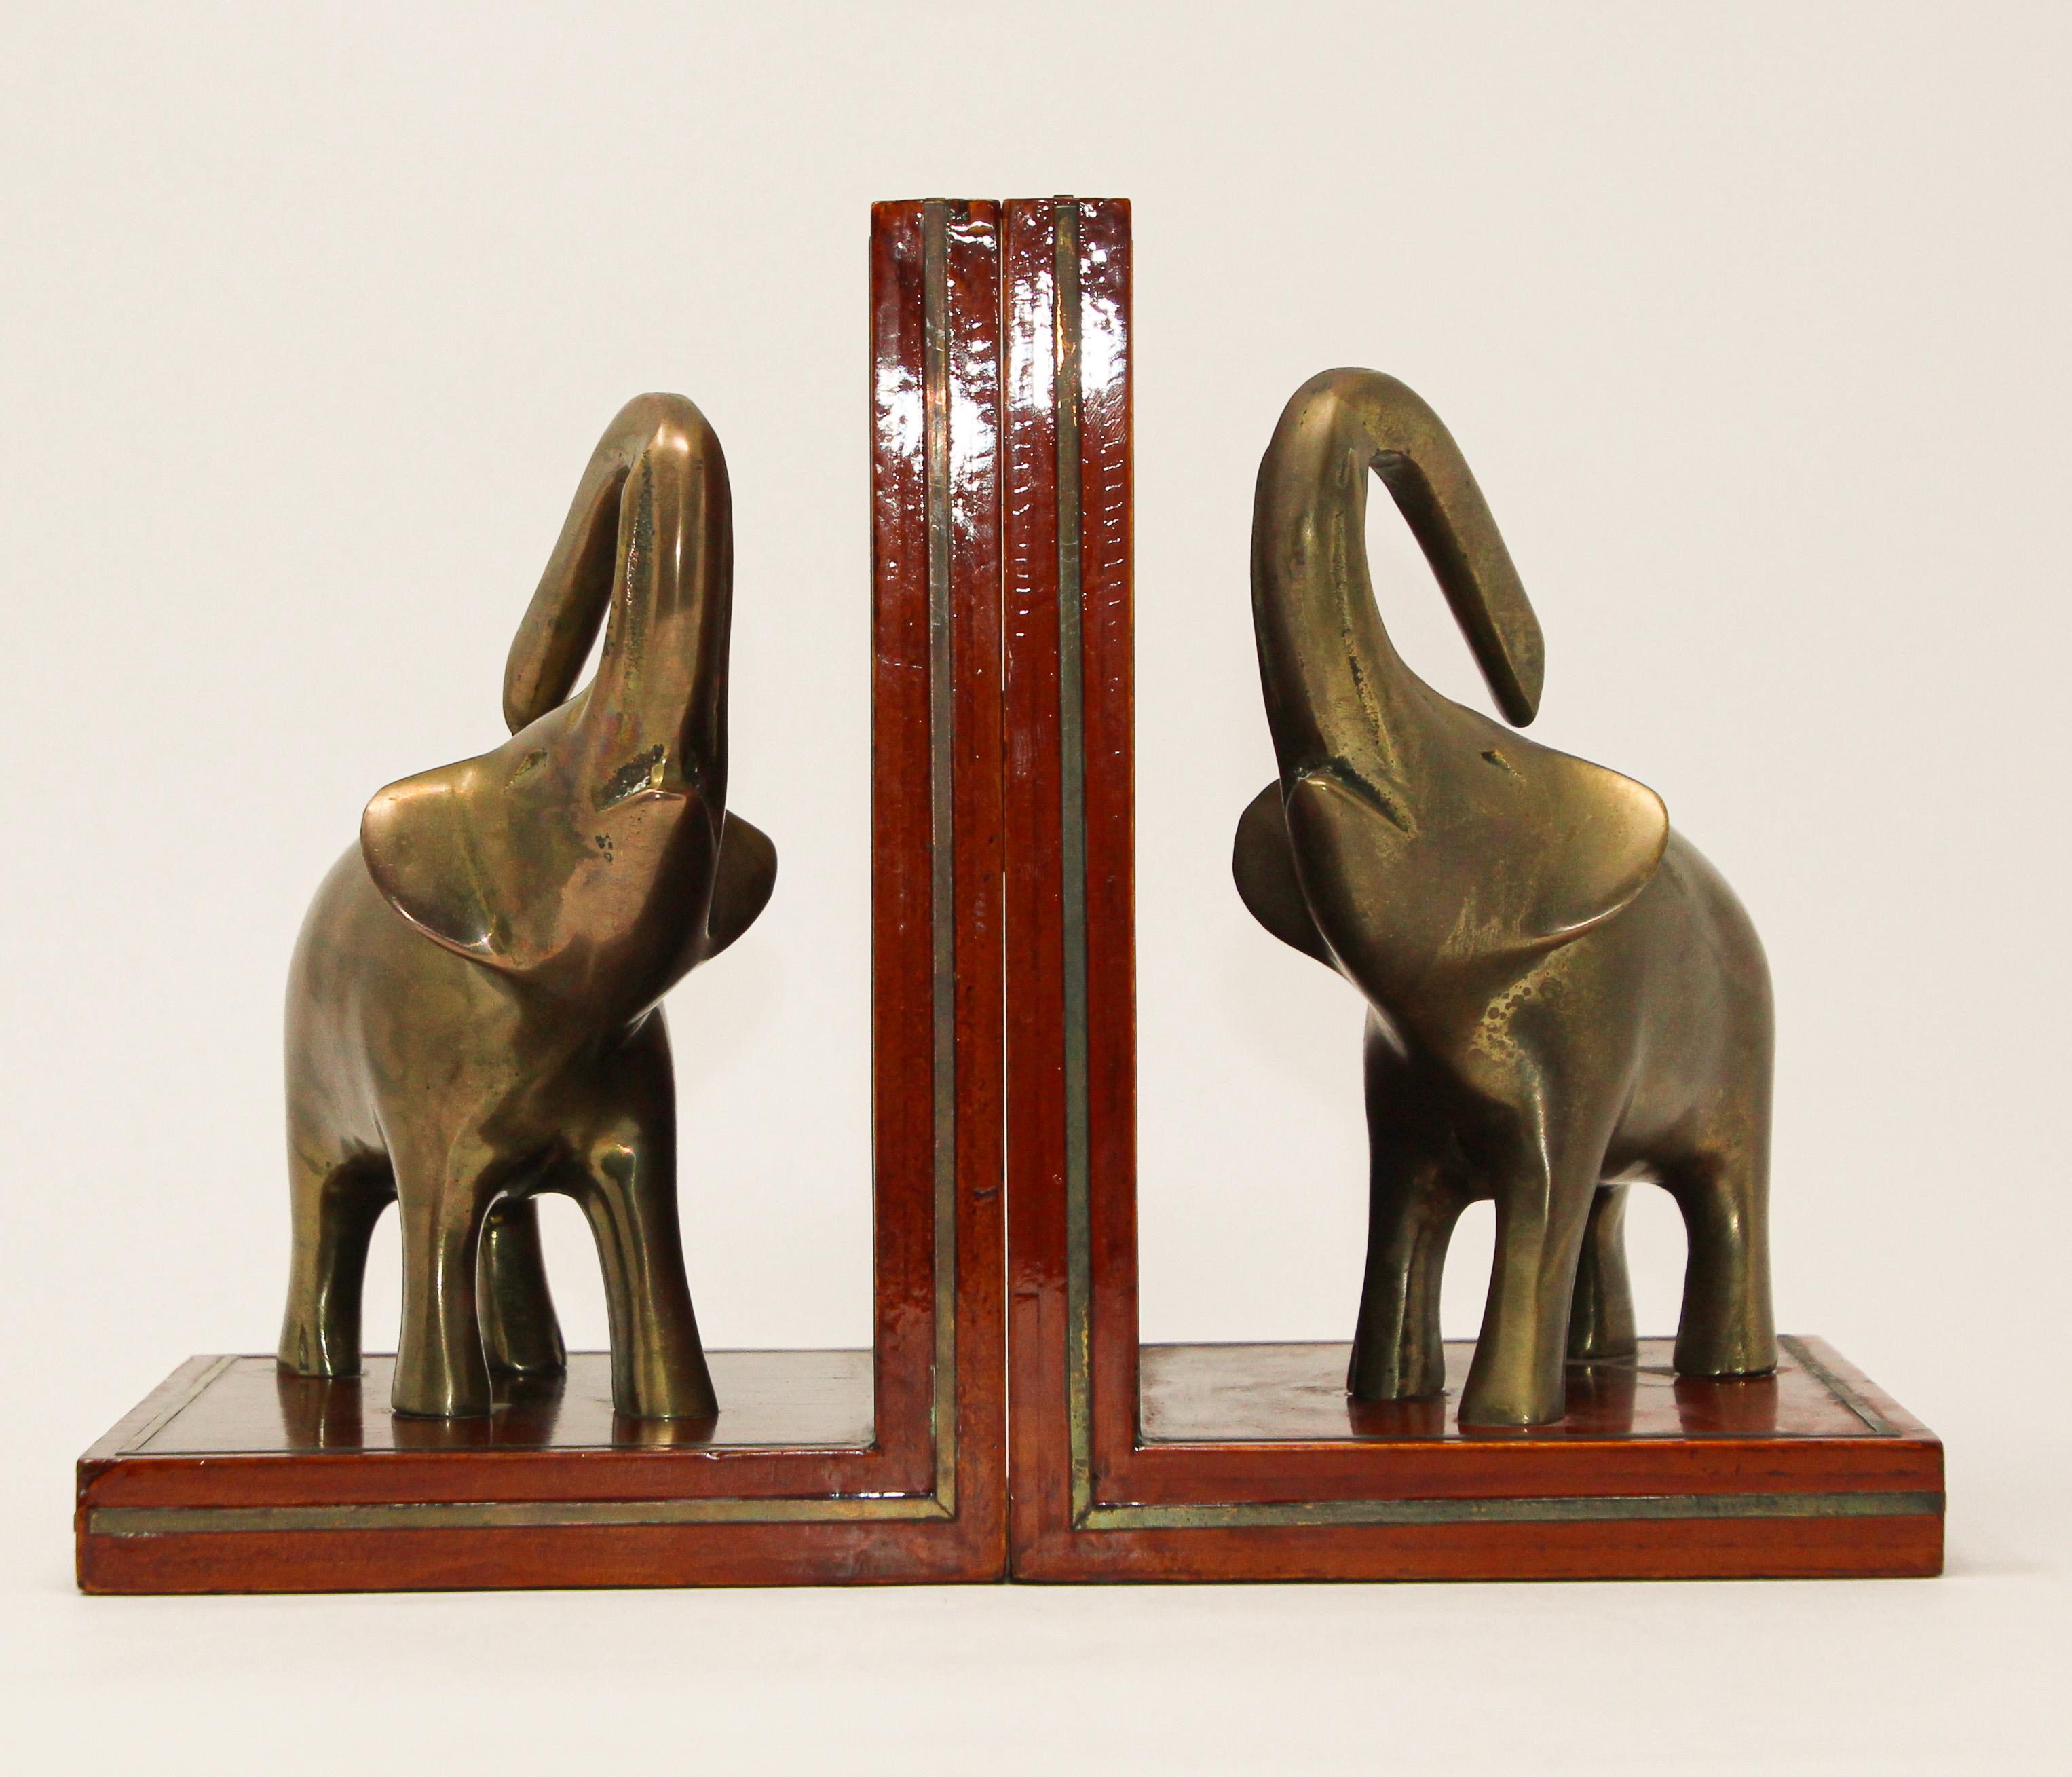 Art Deco style pair of polished brass elephant bookends.
Vintage stylish bookshelf decor elephant’s bookends animal sculpture on wood,
circa 1950
Elephant with trunk up are good luck.
Each book end is: 5